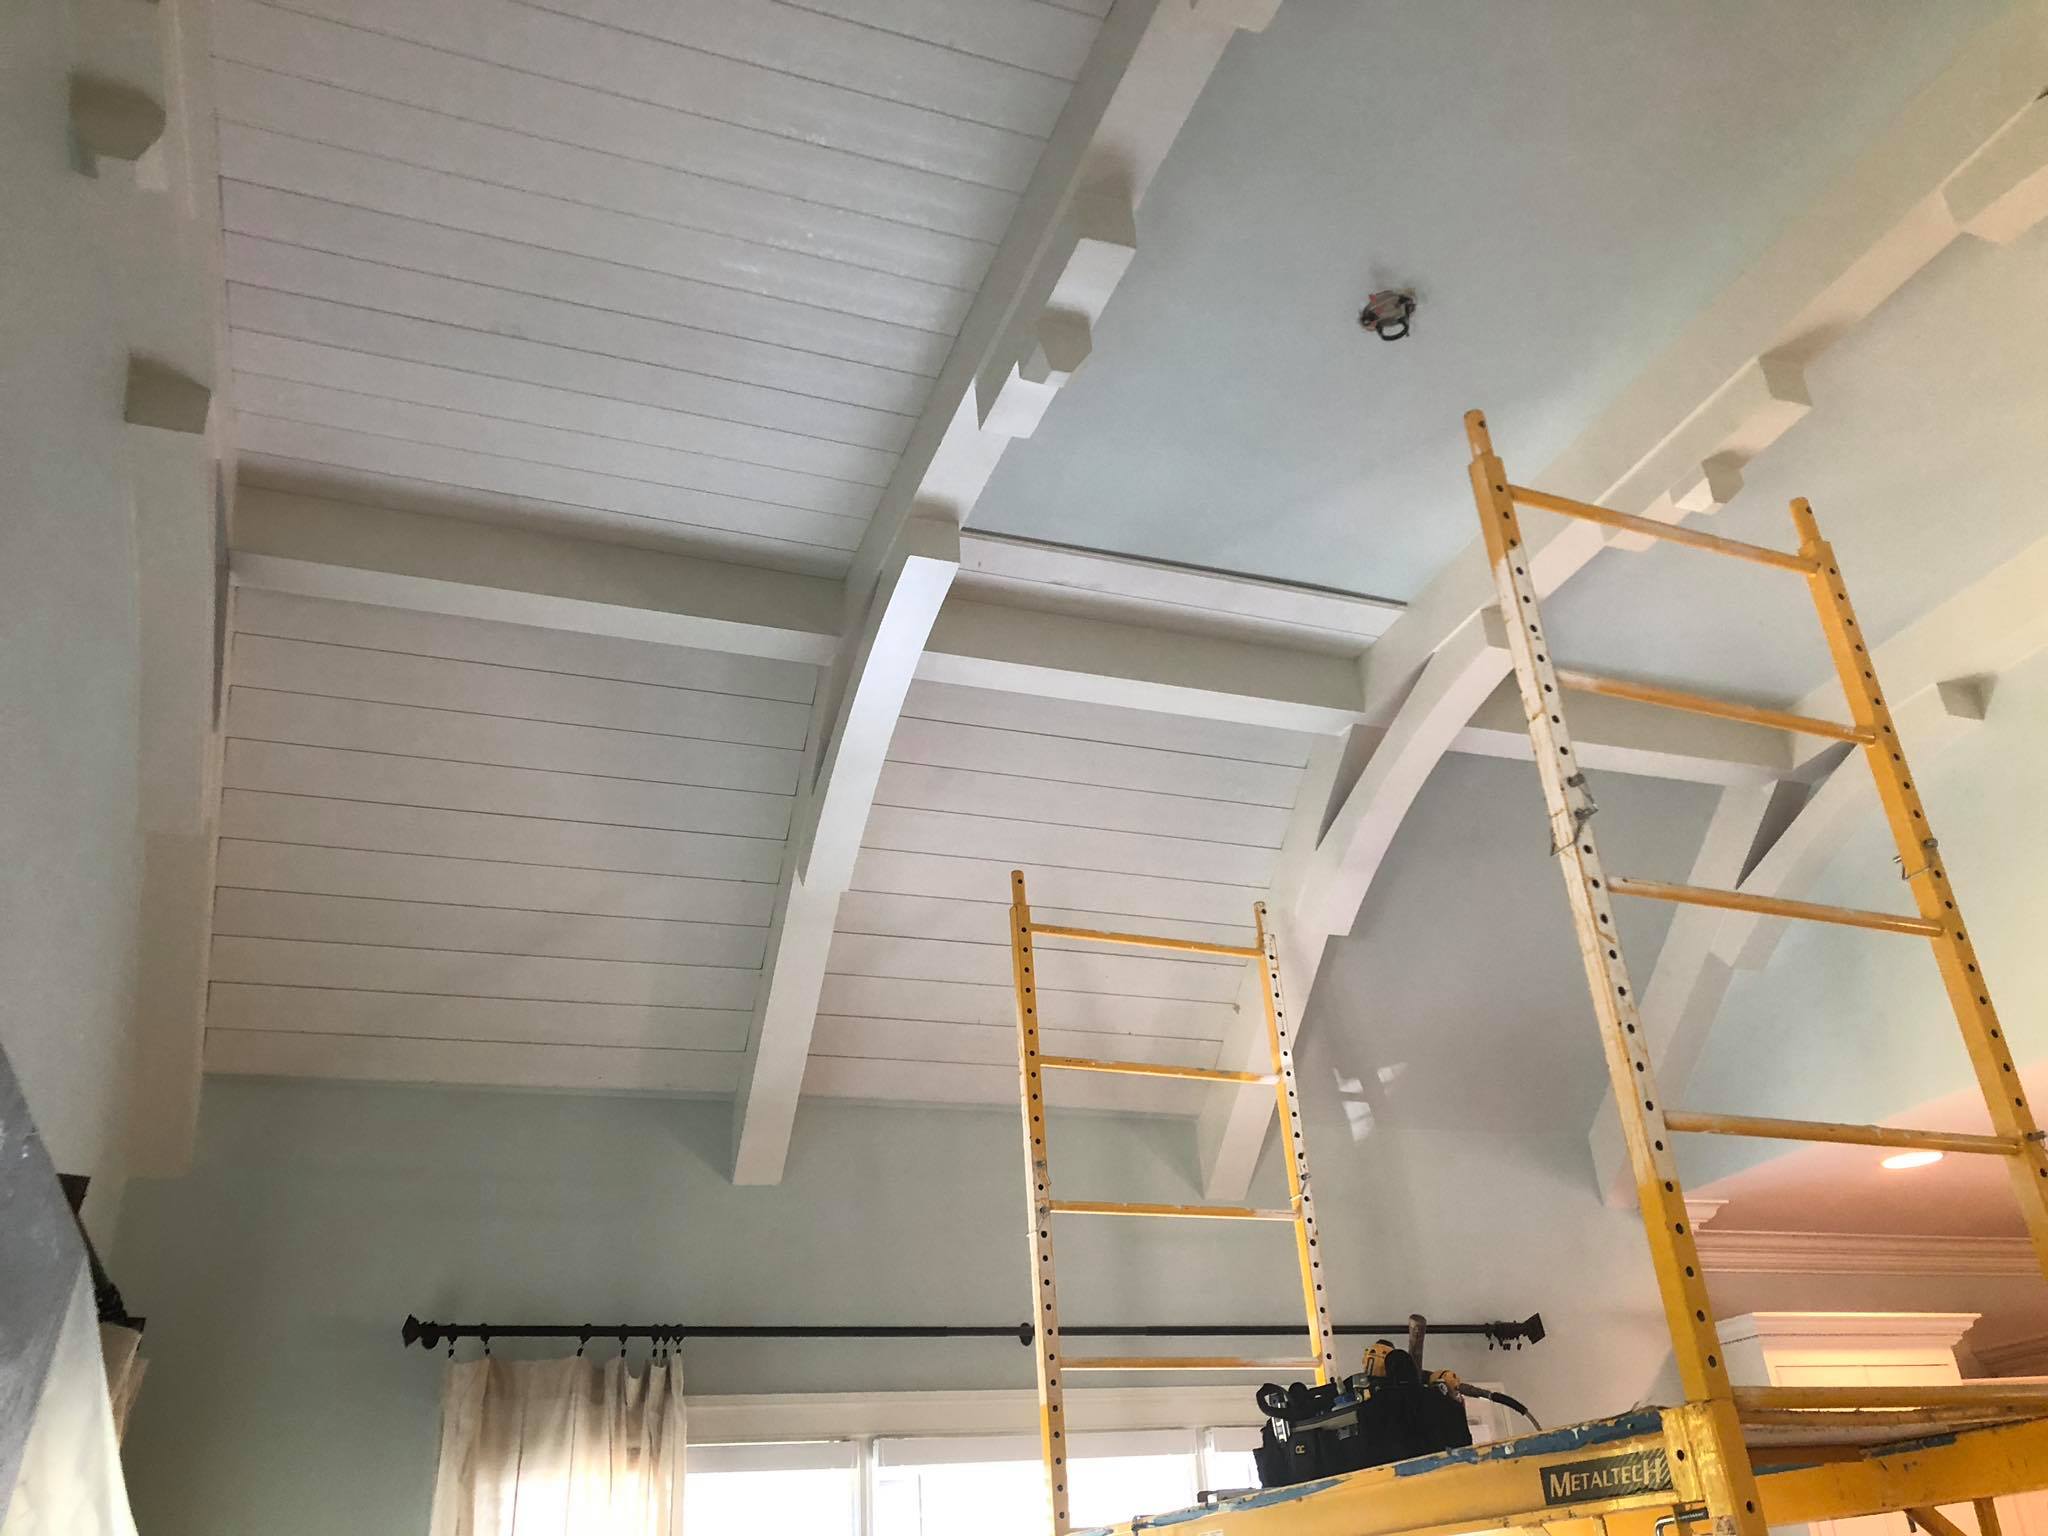 Amazing Ceiling with Multiple Beams and Shiplap Installed Painted White 4